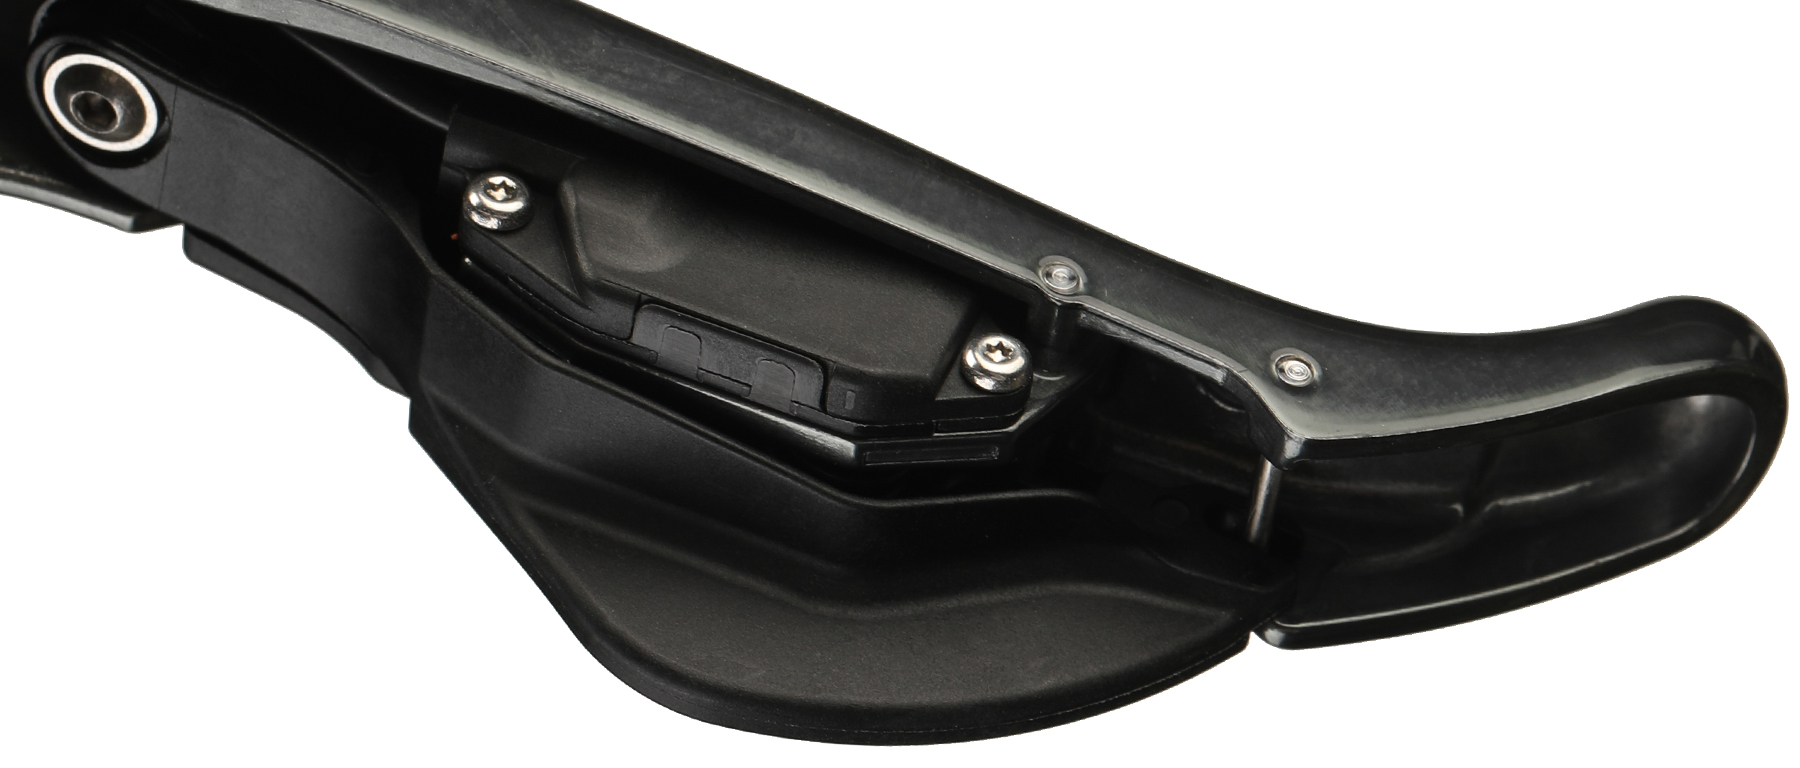 Shimano ST-R785 Di2 Dual Control Lever Set with Calipers